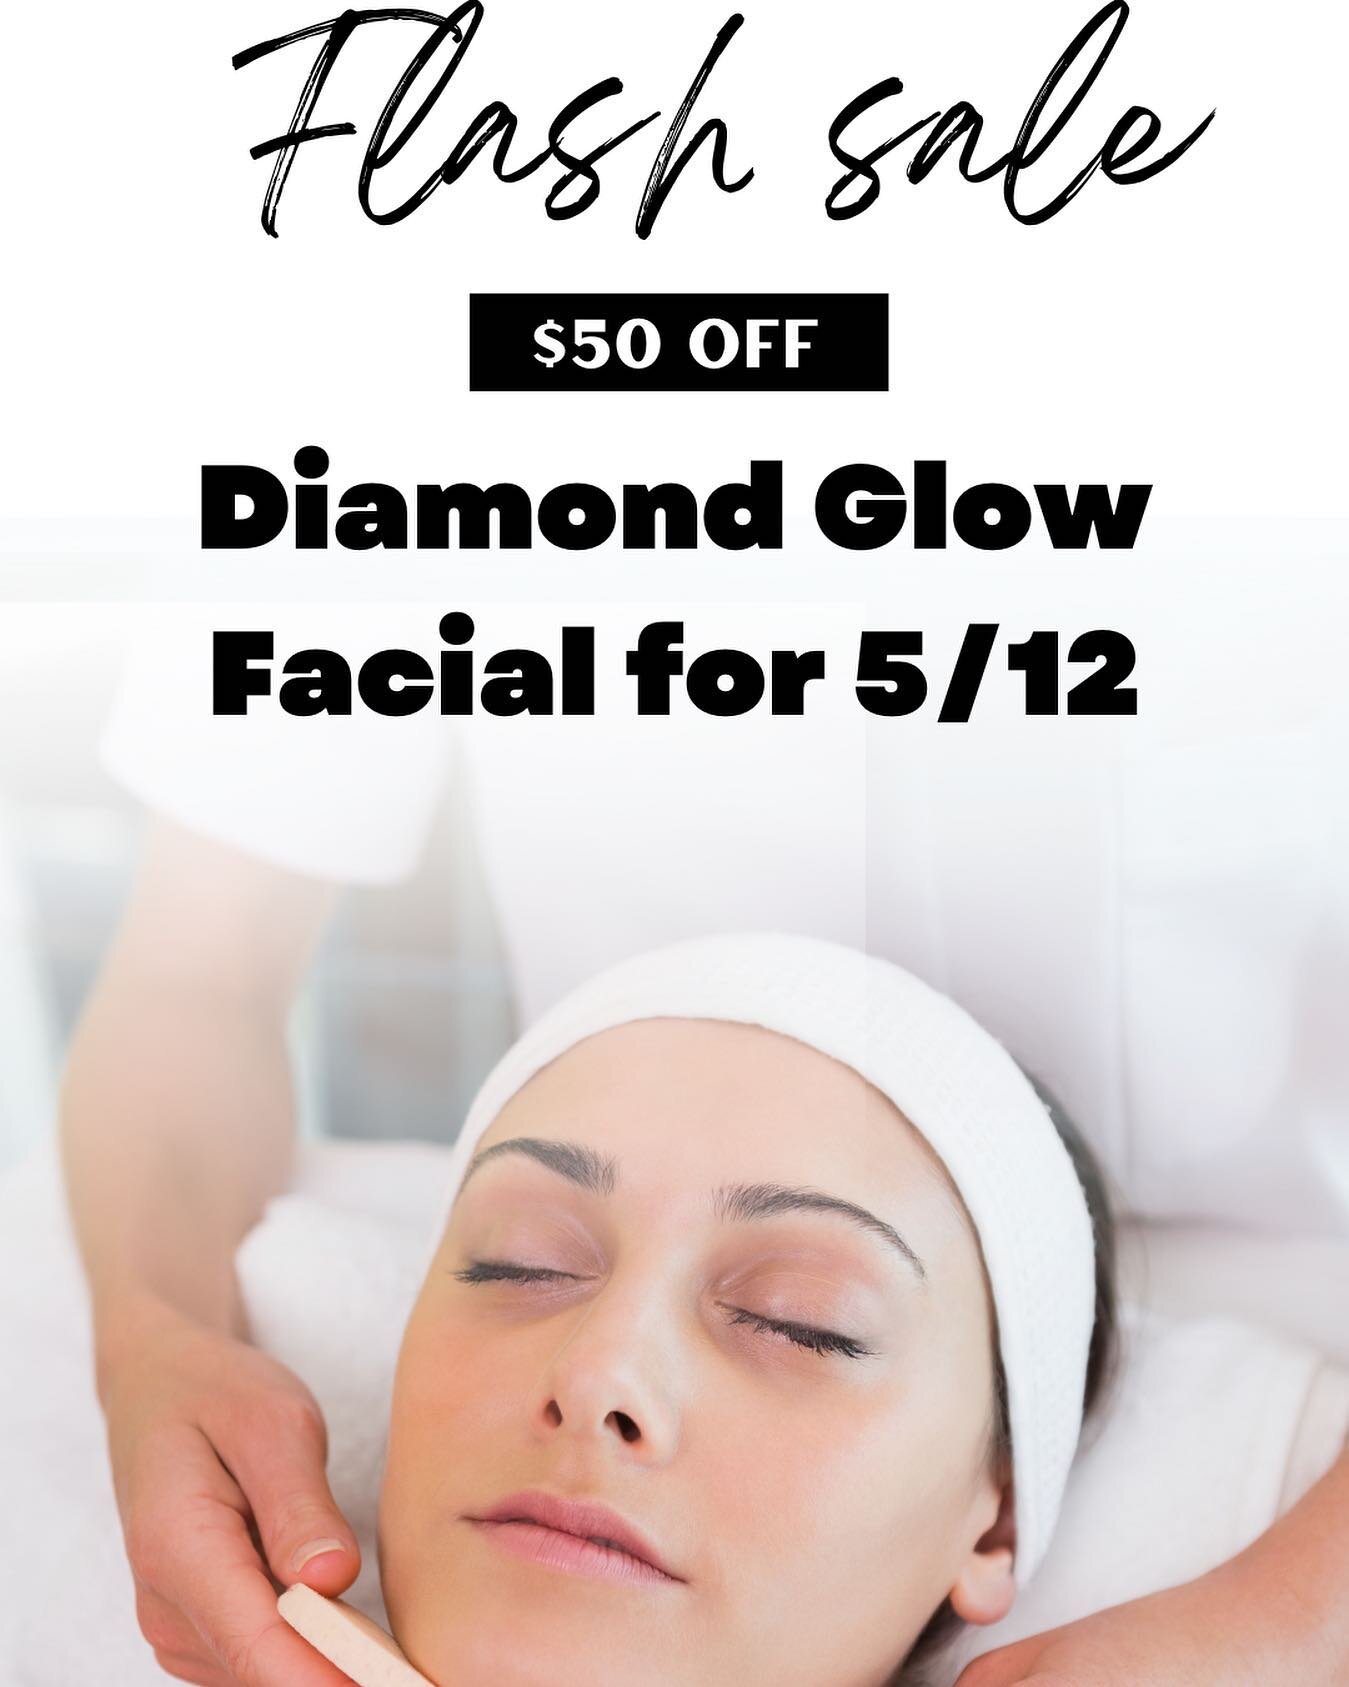 💎Get your skin ready for summer tomorrow with a $150 Diamond glow facial! Treat mom before the big weekend and get her a Diamond Glow facial on Friday in Windham!